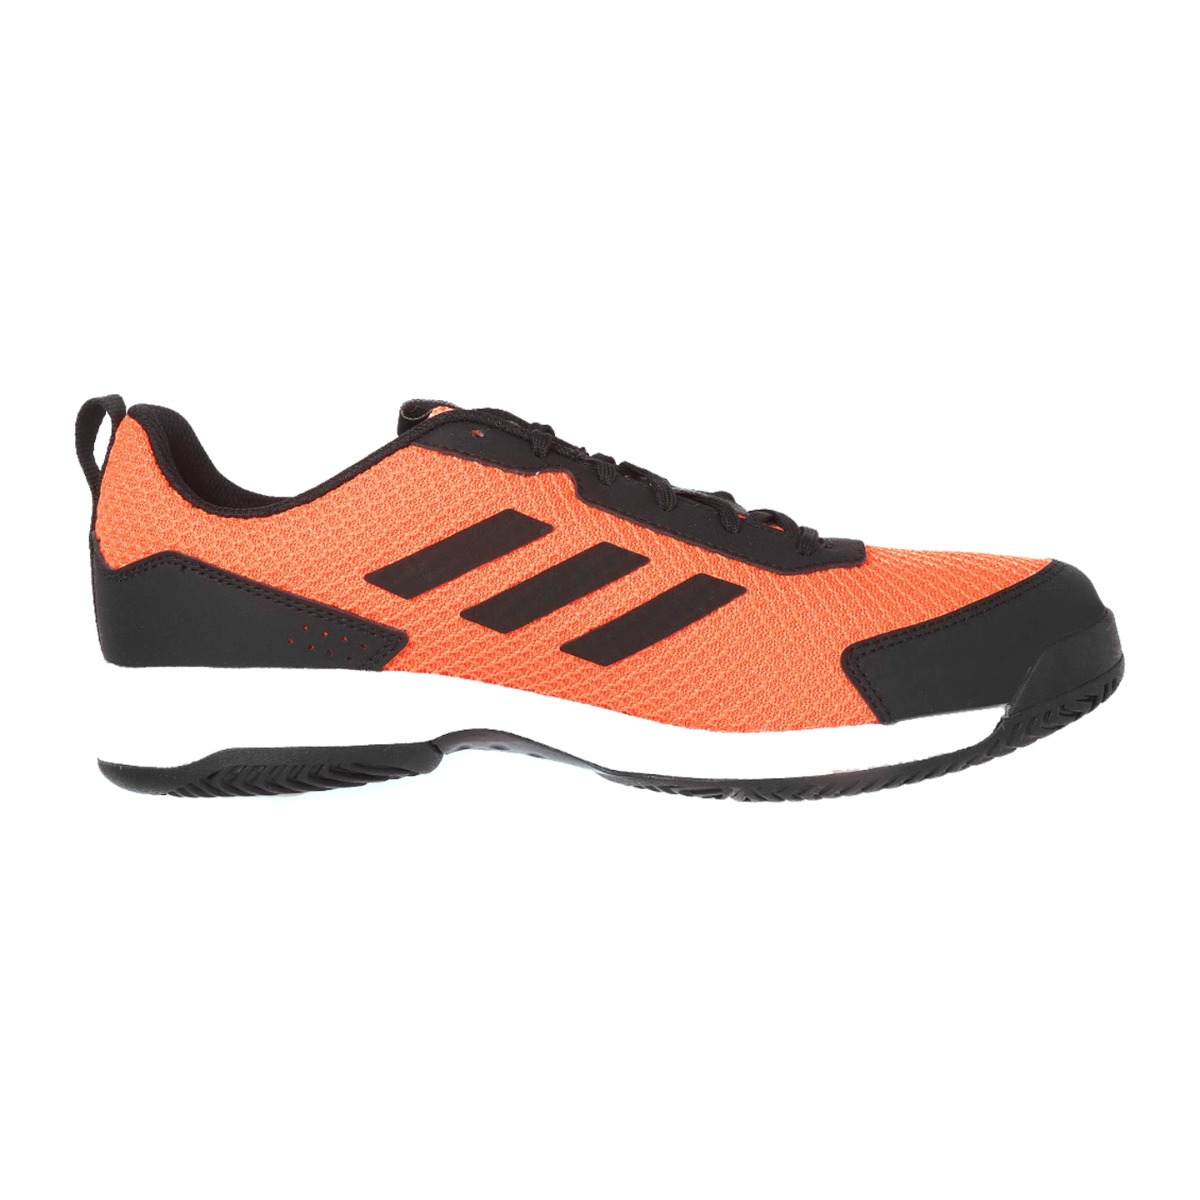 Adidas 9 White, Orange Mens Shoes Price Starting From Rs 3,101 | Find  Verified Sellers at Justdial